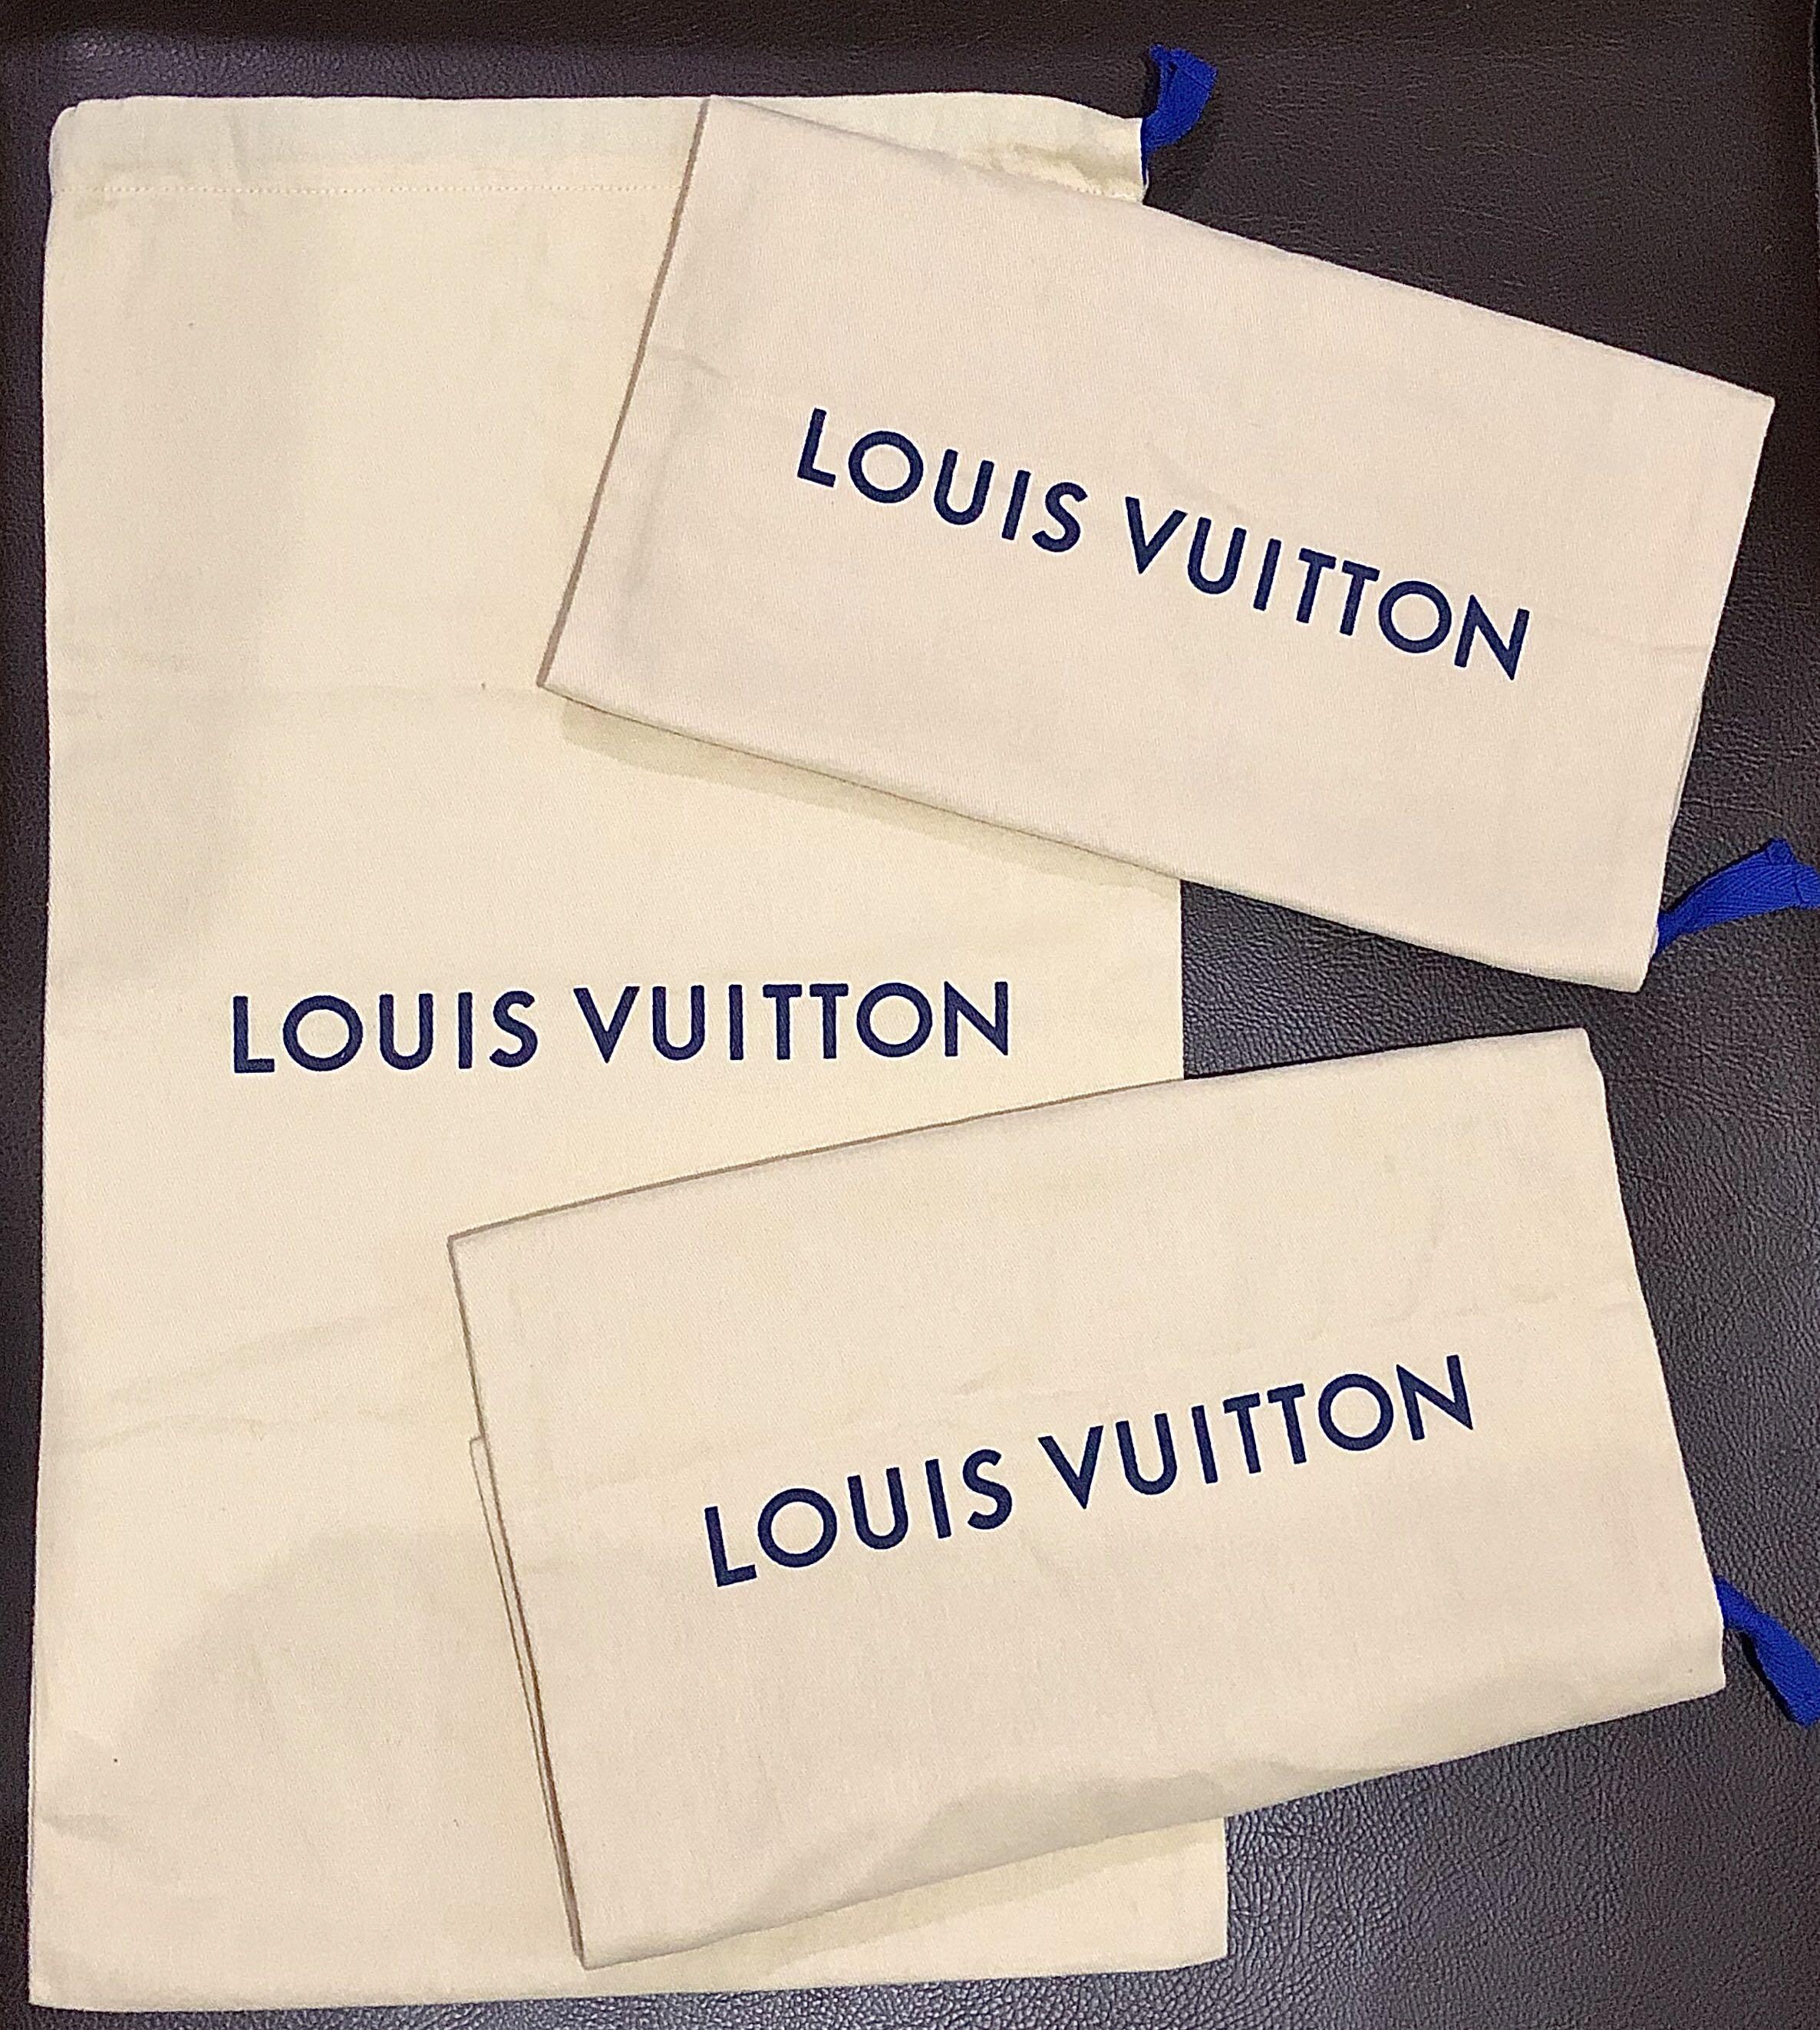 LOUIS VUITTON DUSTBAG WITH ENVELOPE - AUTHENTIC - NEW (LV), Luxury